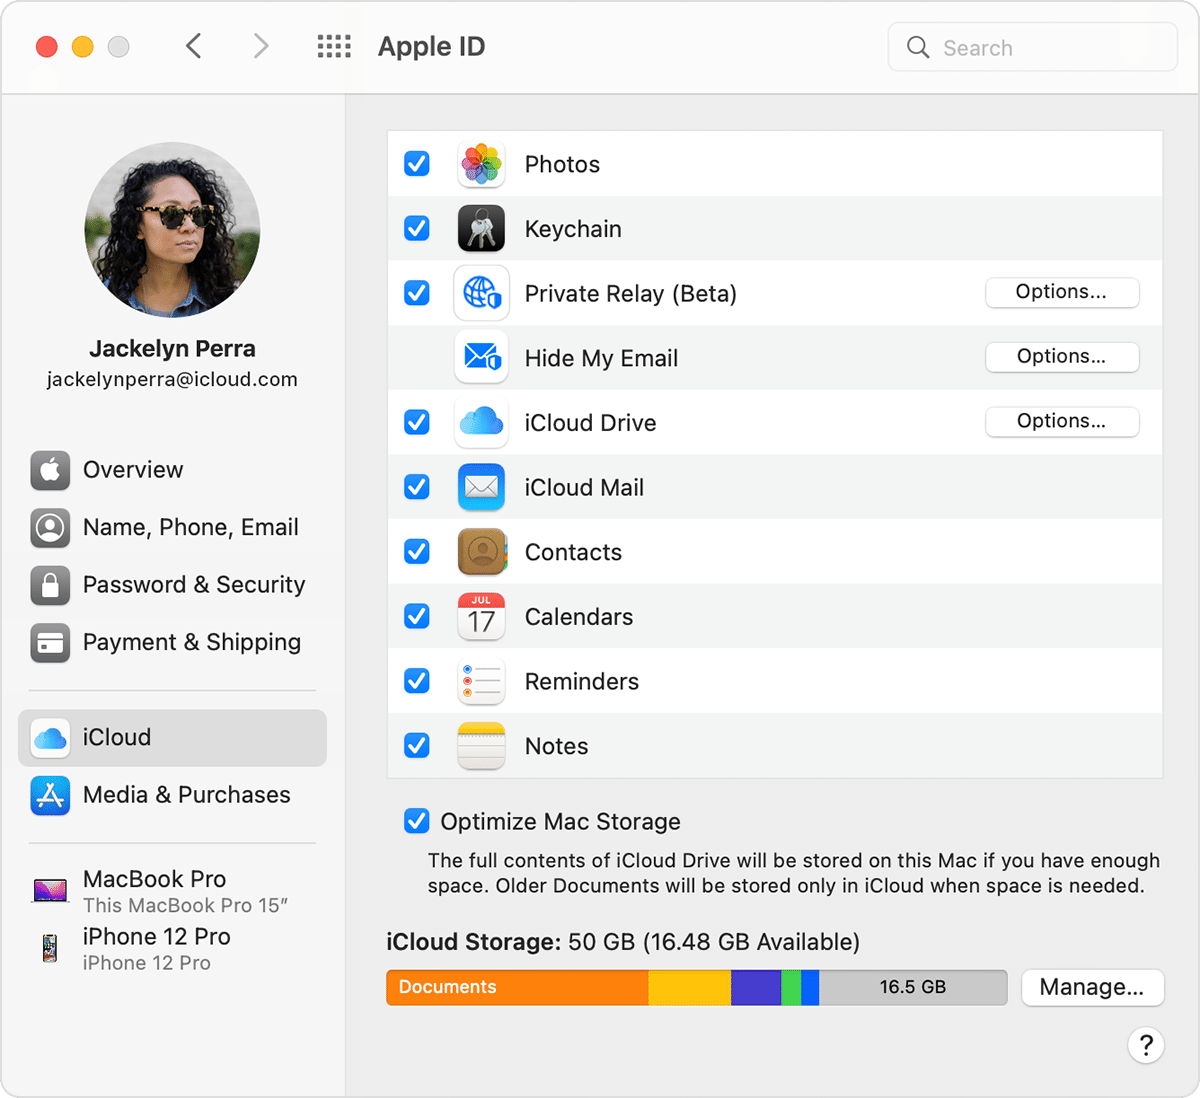 Manage your iCloud storage on Mac